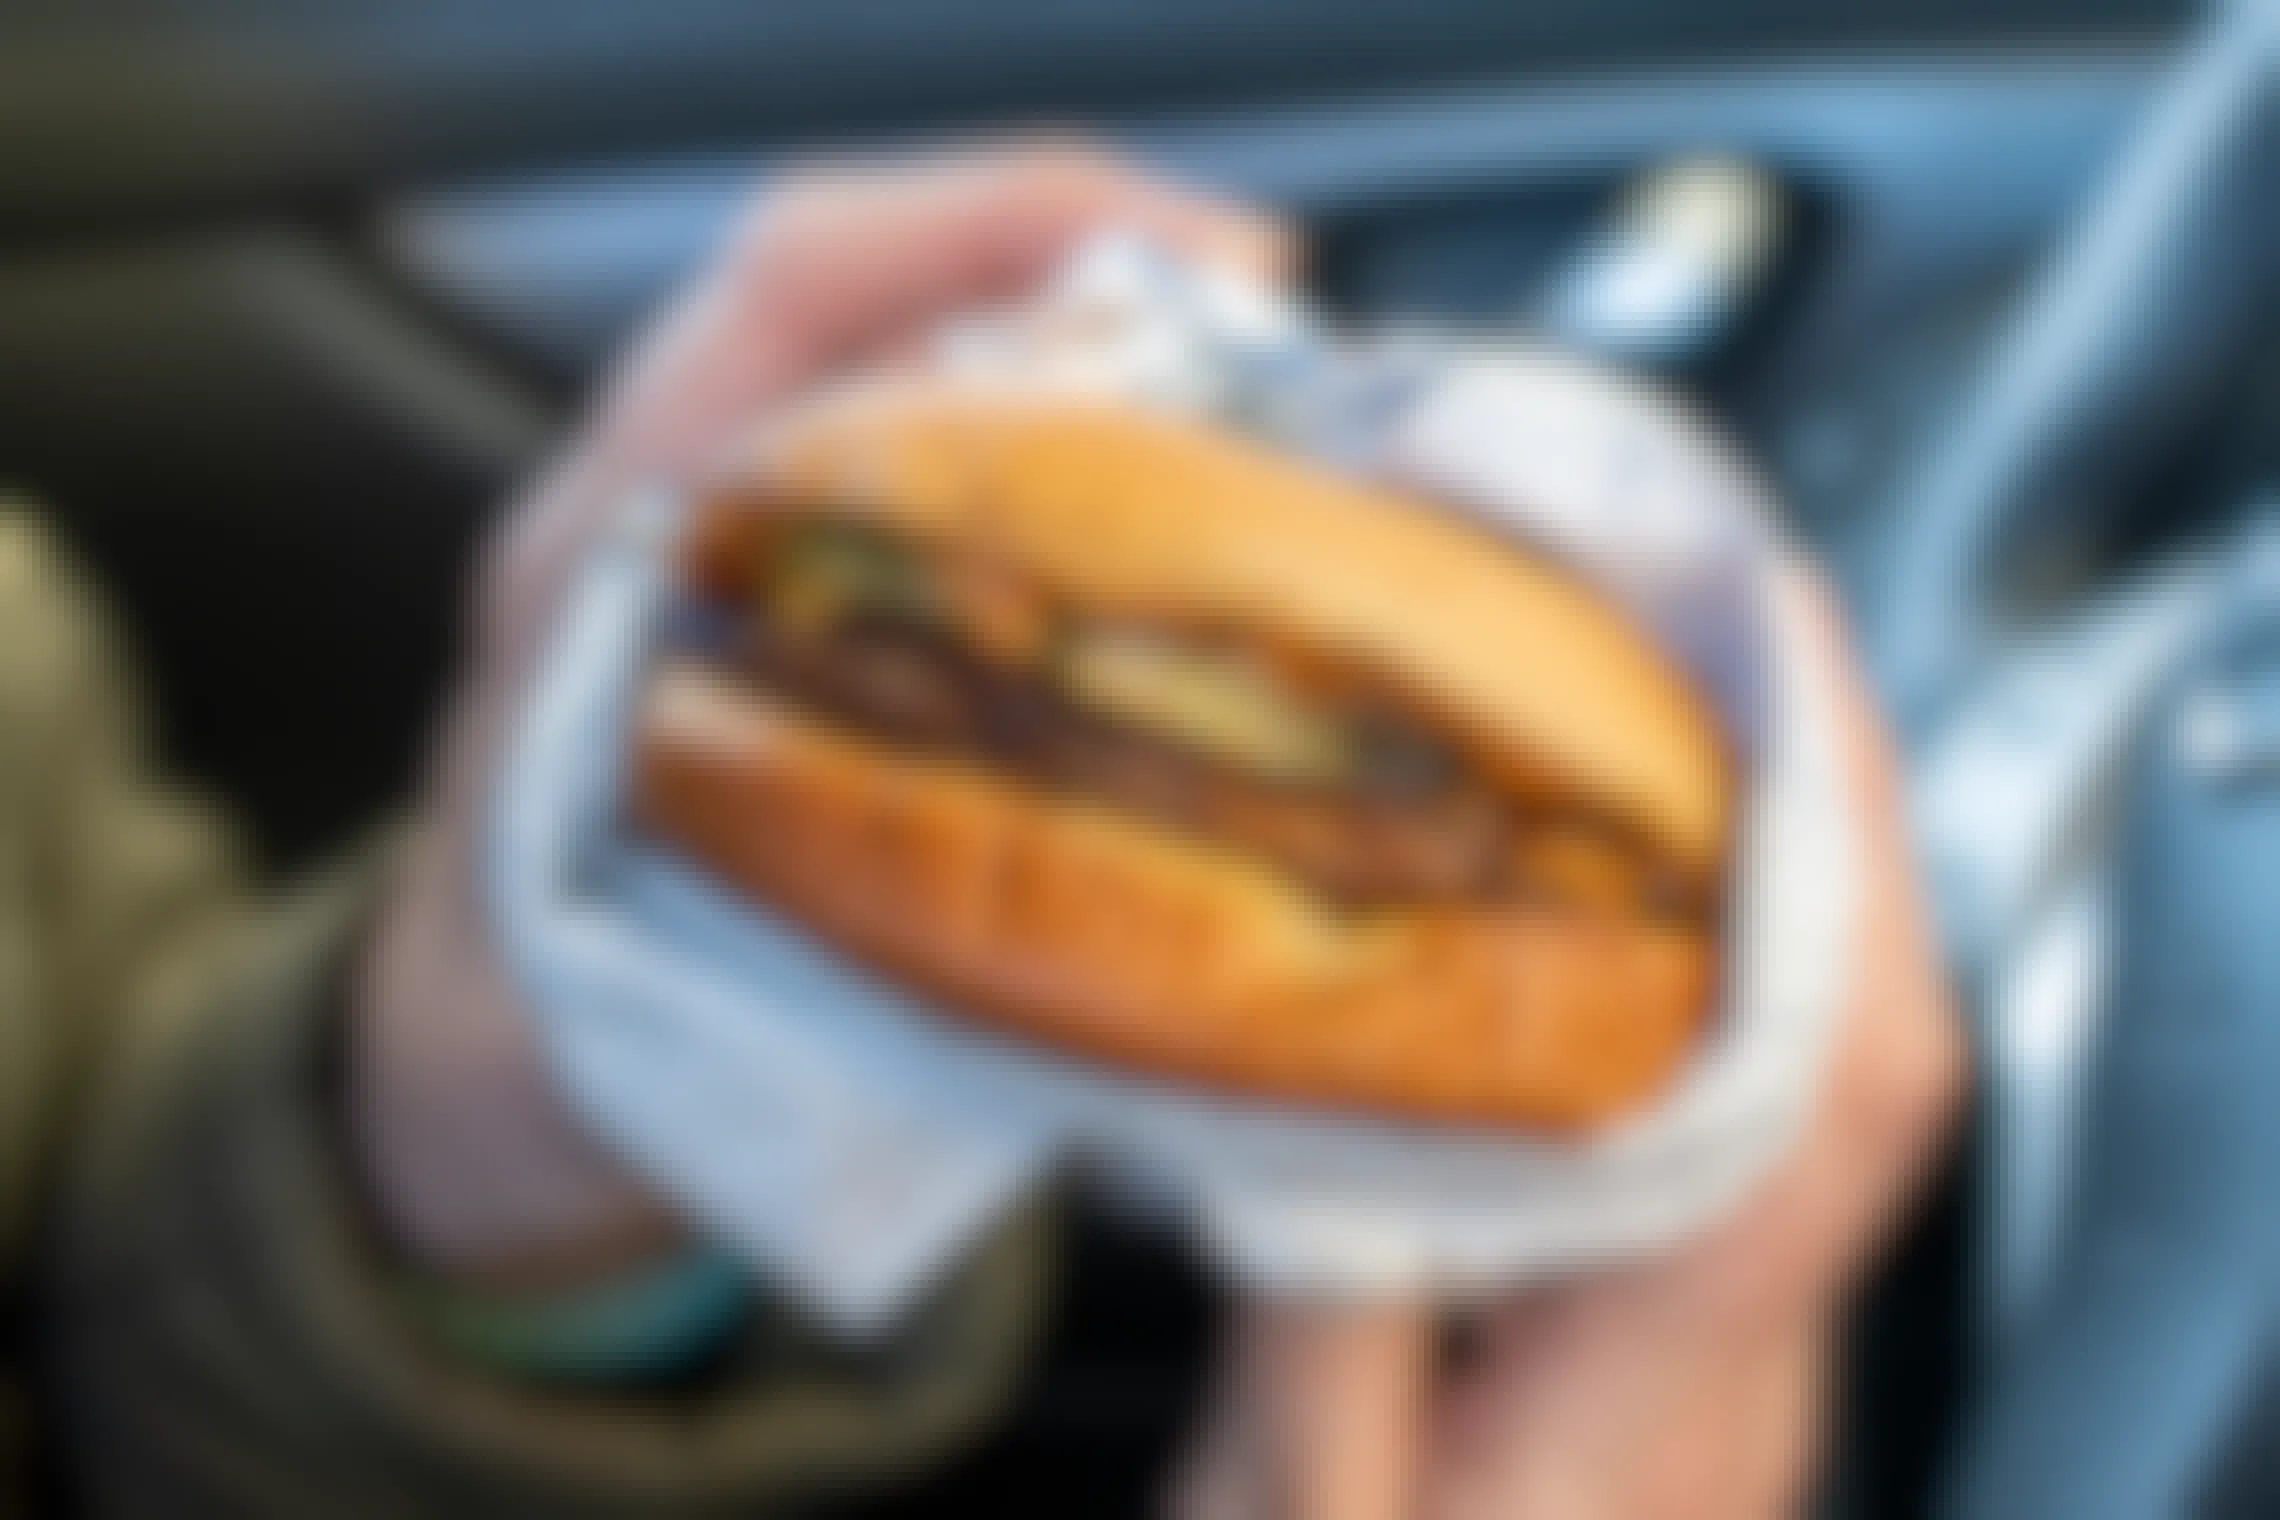 A close-up of a Sonic cheeseburger being held by someone sitting in a car.